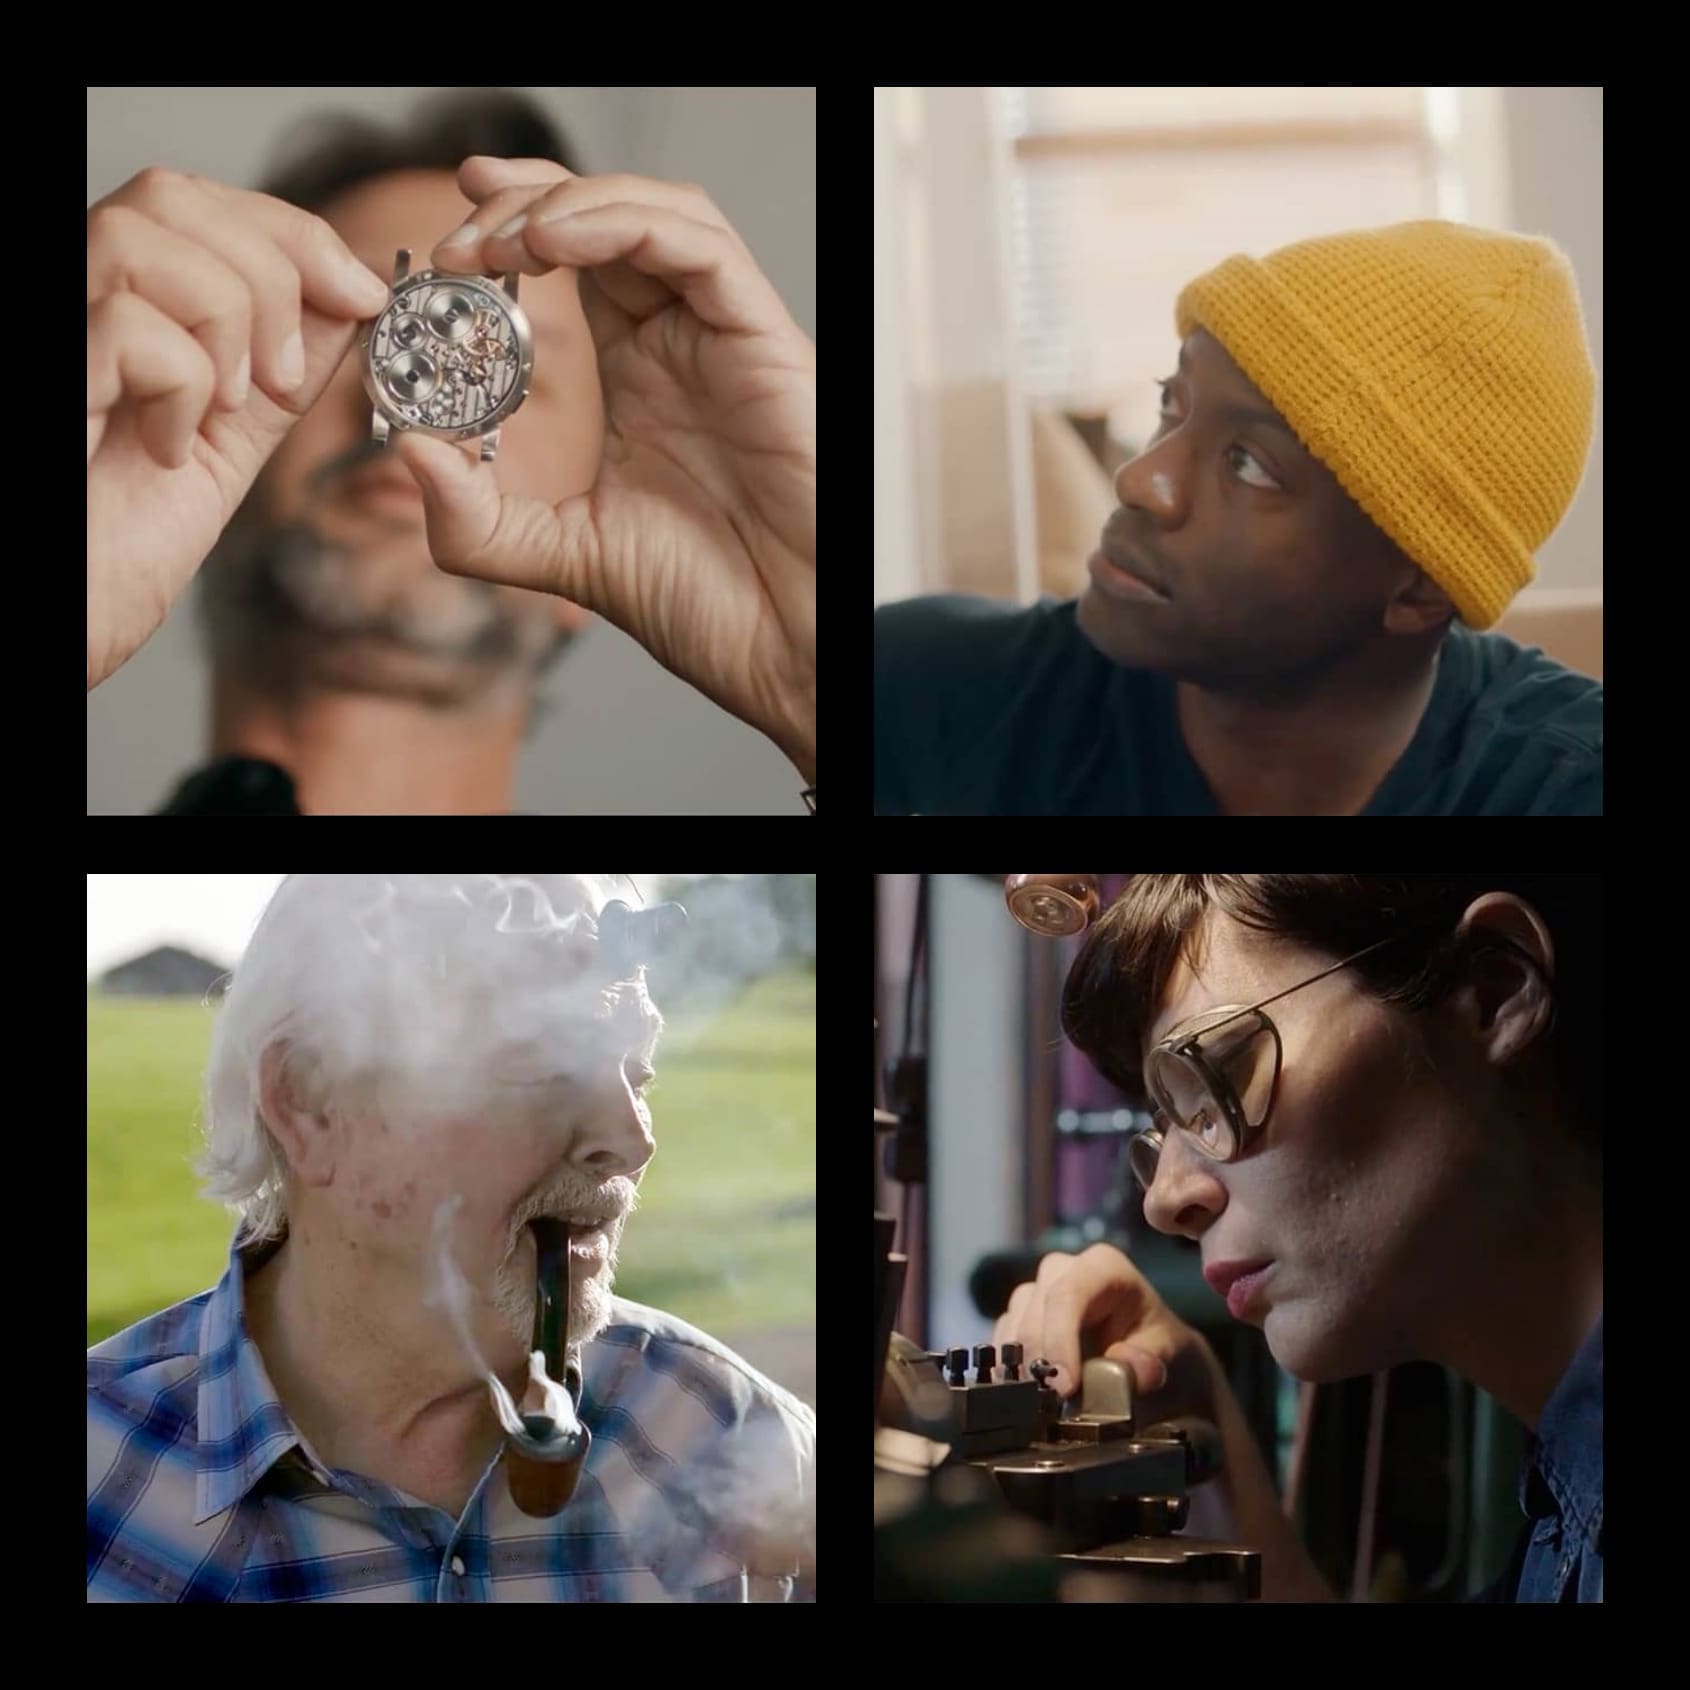 One to watch: “Making Time” documentary now available to stream in time for the holiday break